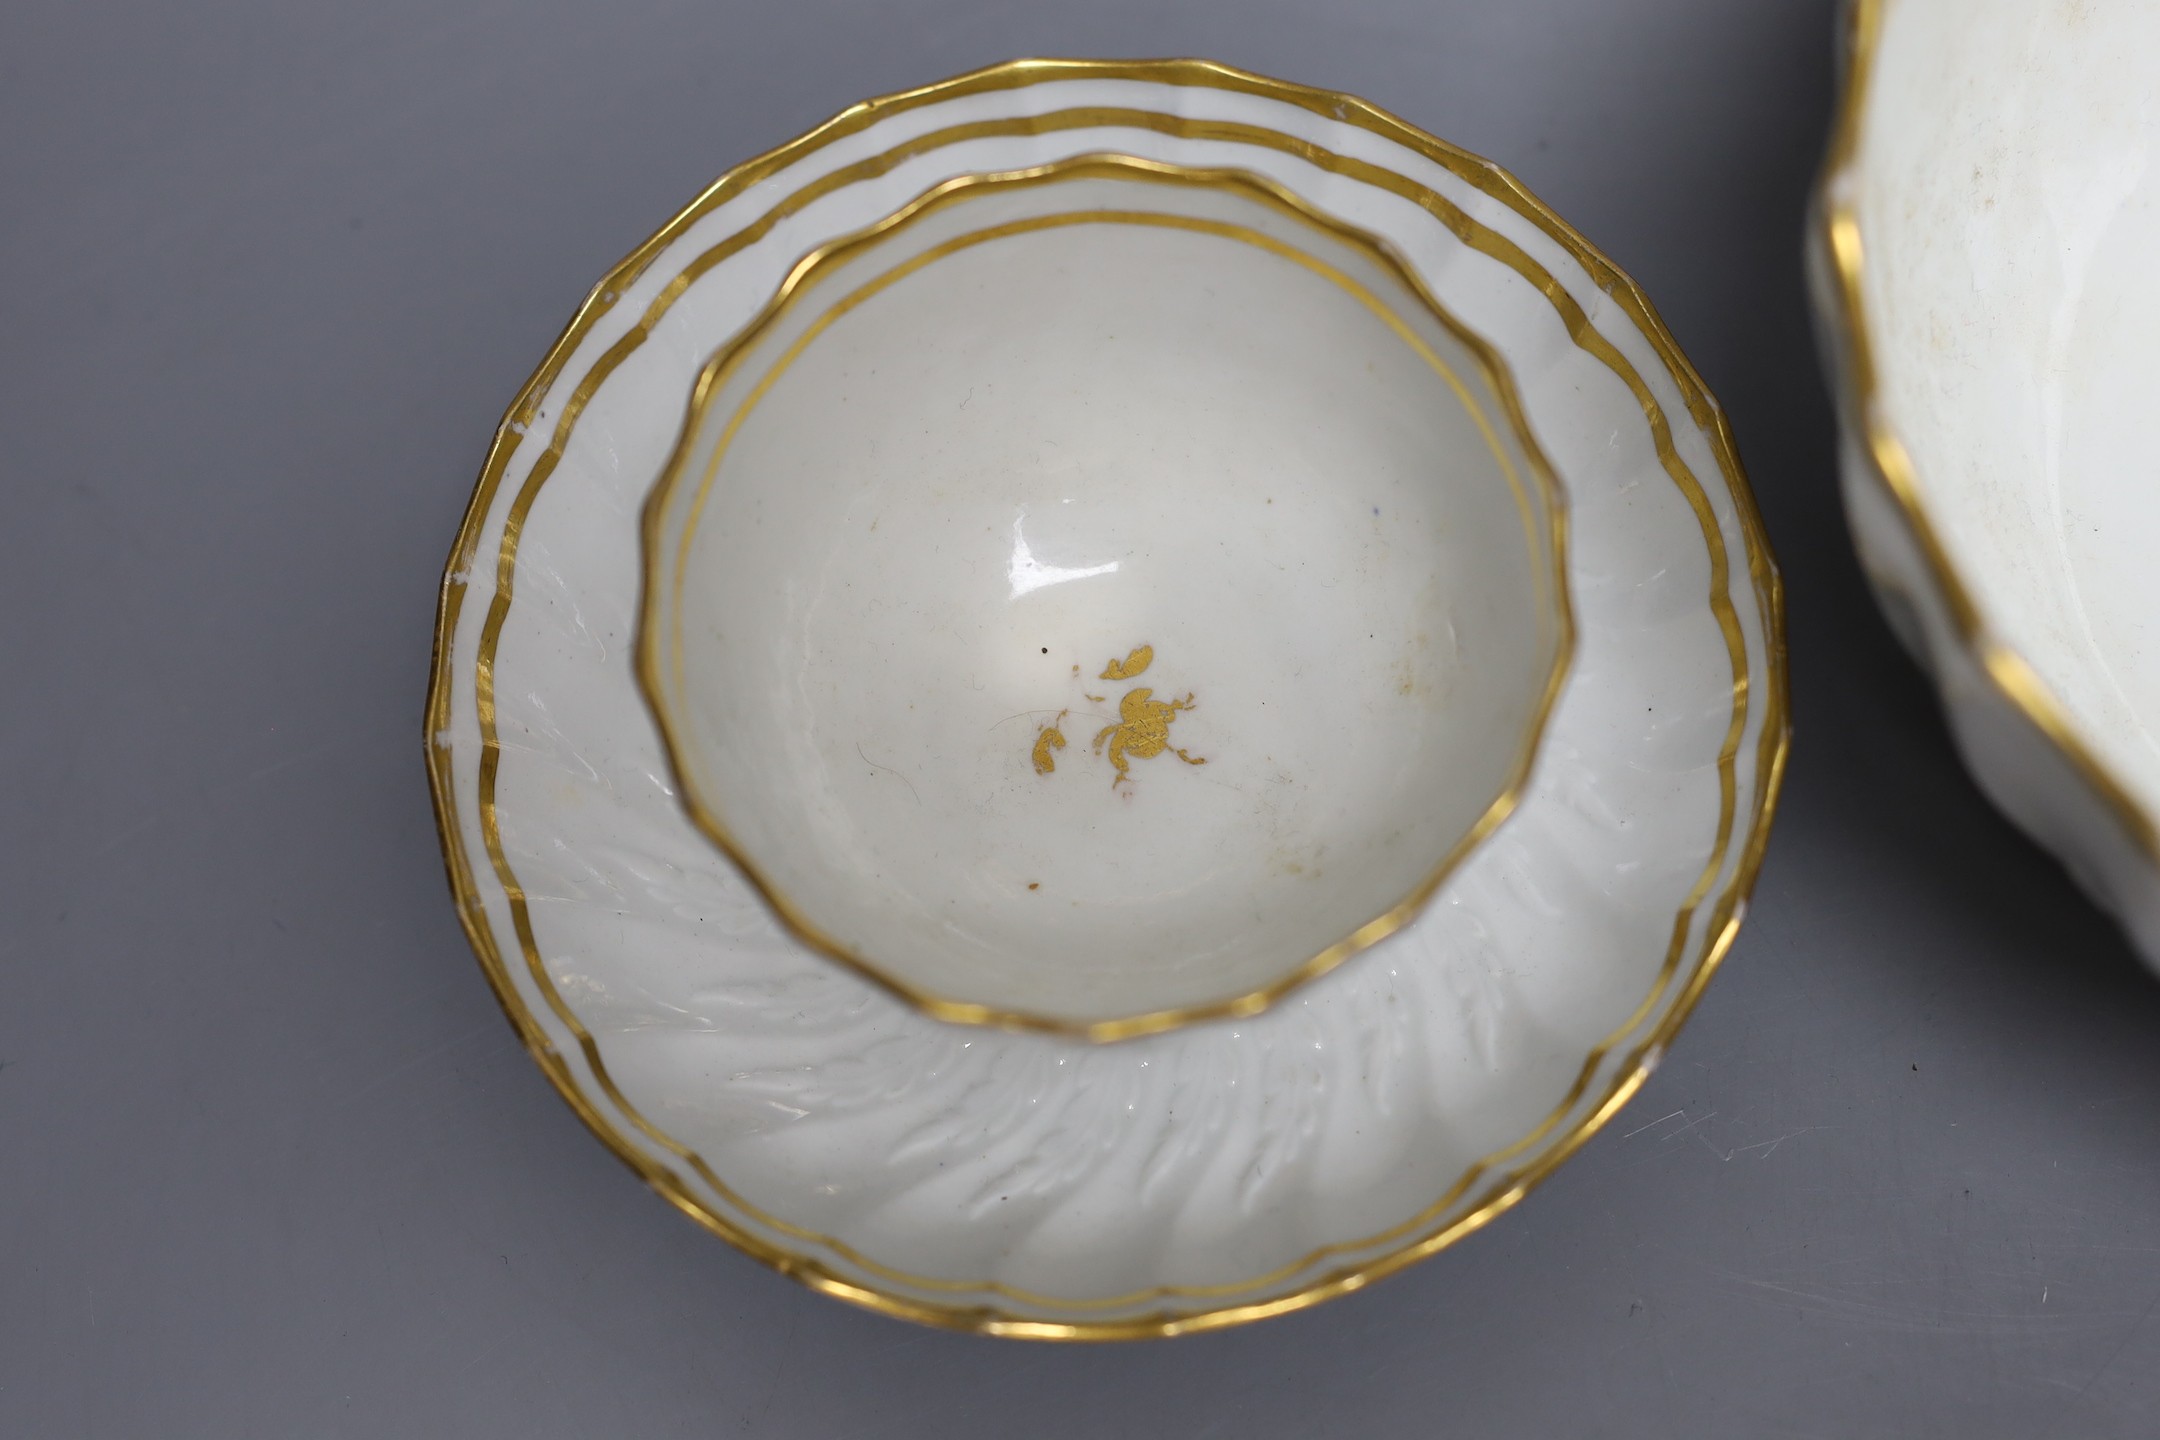 A Neale and Co rare teabowl and saucer and a matching bowl, each piece with acanthus leaf and spirally shanked moulding, the interiors with a gilt floret design, within gilt line borders, for a similar teabowl see Michae